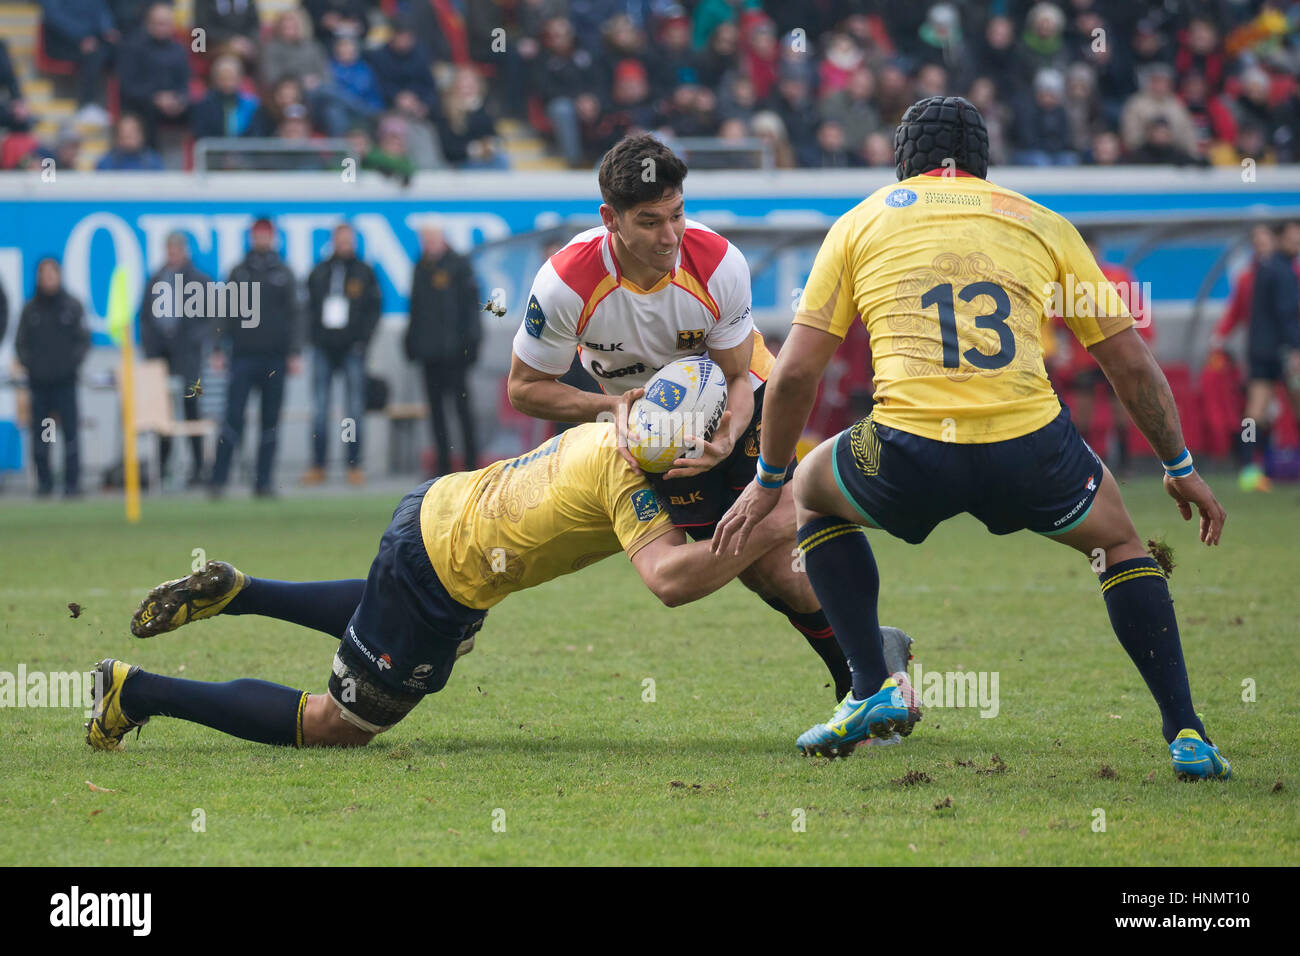 Chris Hilsenbeck (M) of Germany is hindered by Vlad Nistor and Jack Umaga from Romania during the first match of the Rugby Europe Championship between Germany and Romania in Offenbach, Germany, 11 February 2017. Photo: Jürgen Keßler/dpa Stock Photo